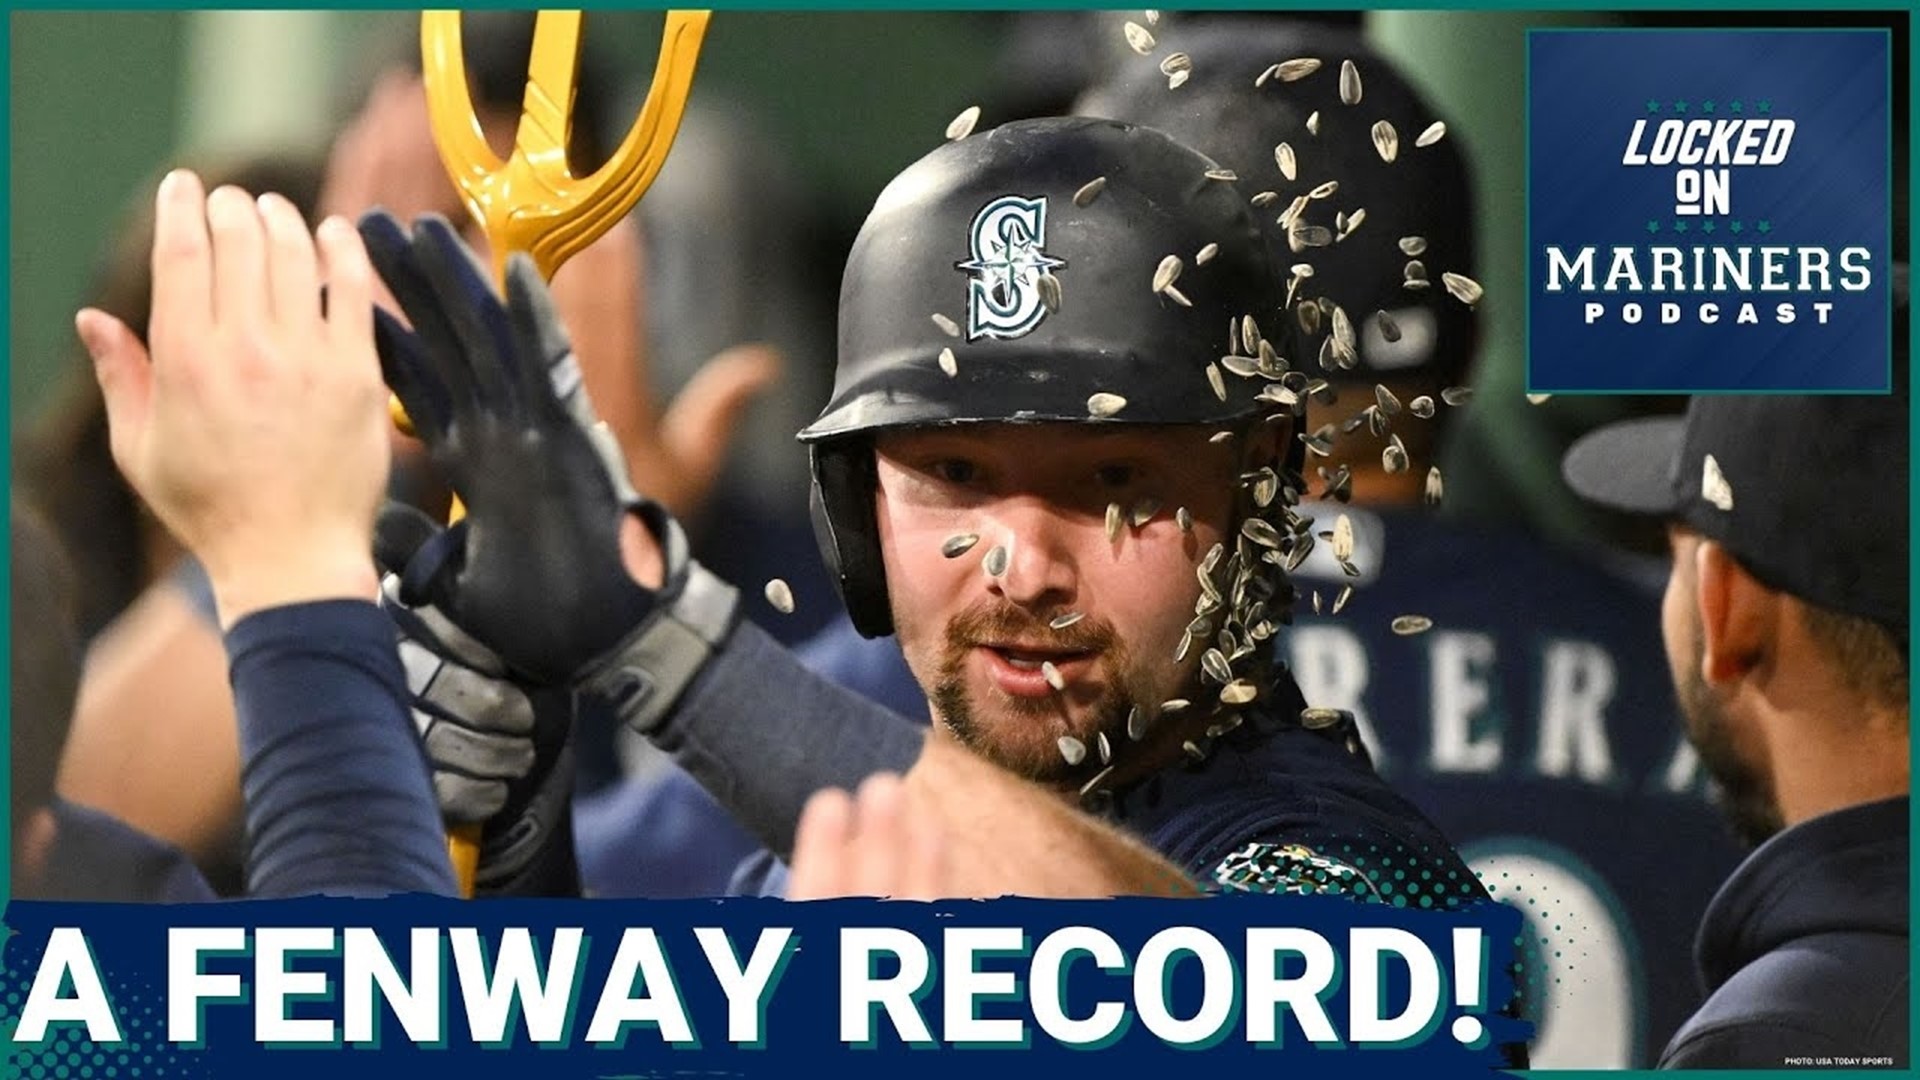 Cal Raleigh Does Something No Catcher Has Done Before as Mariners